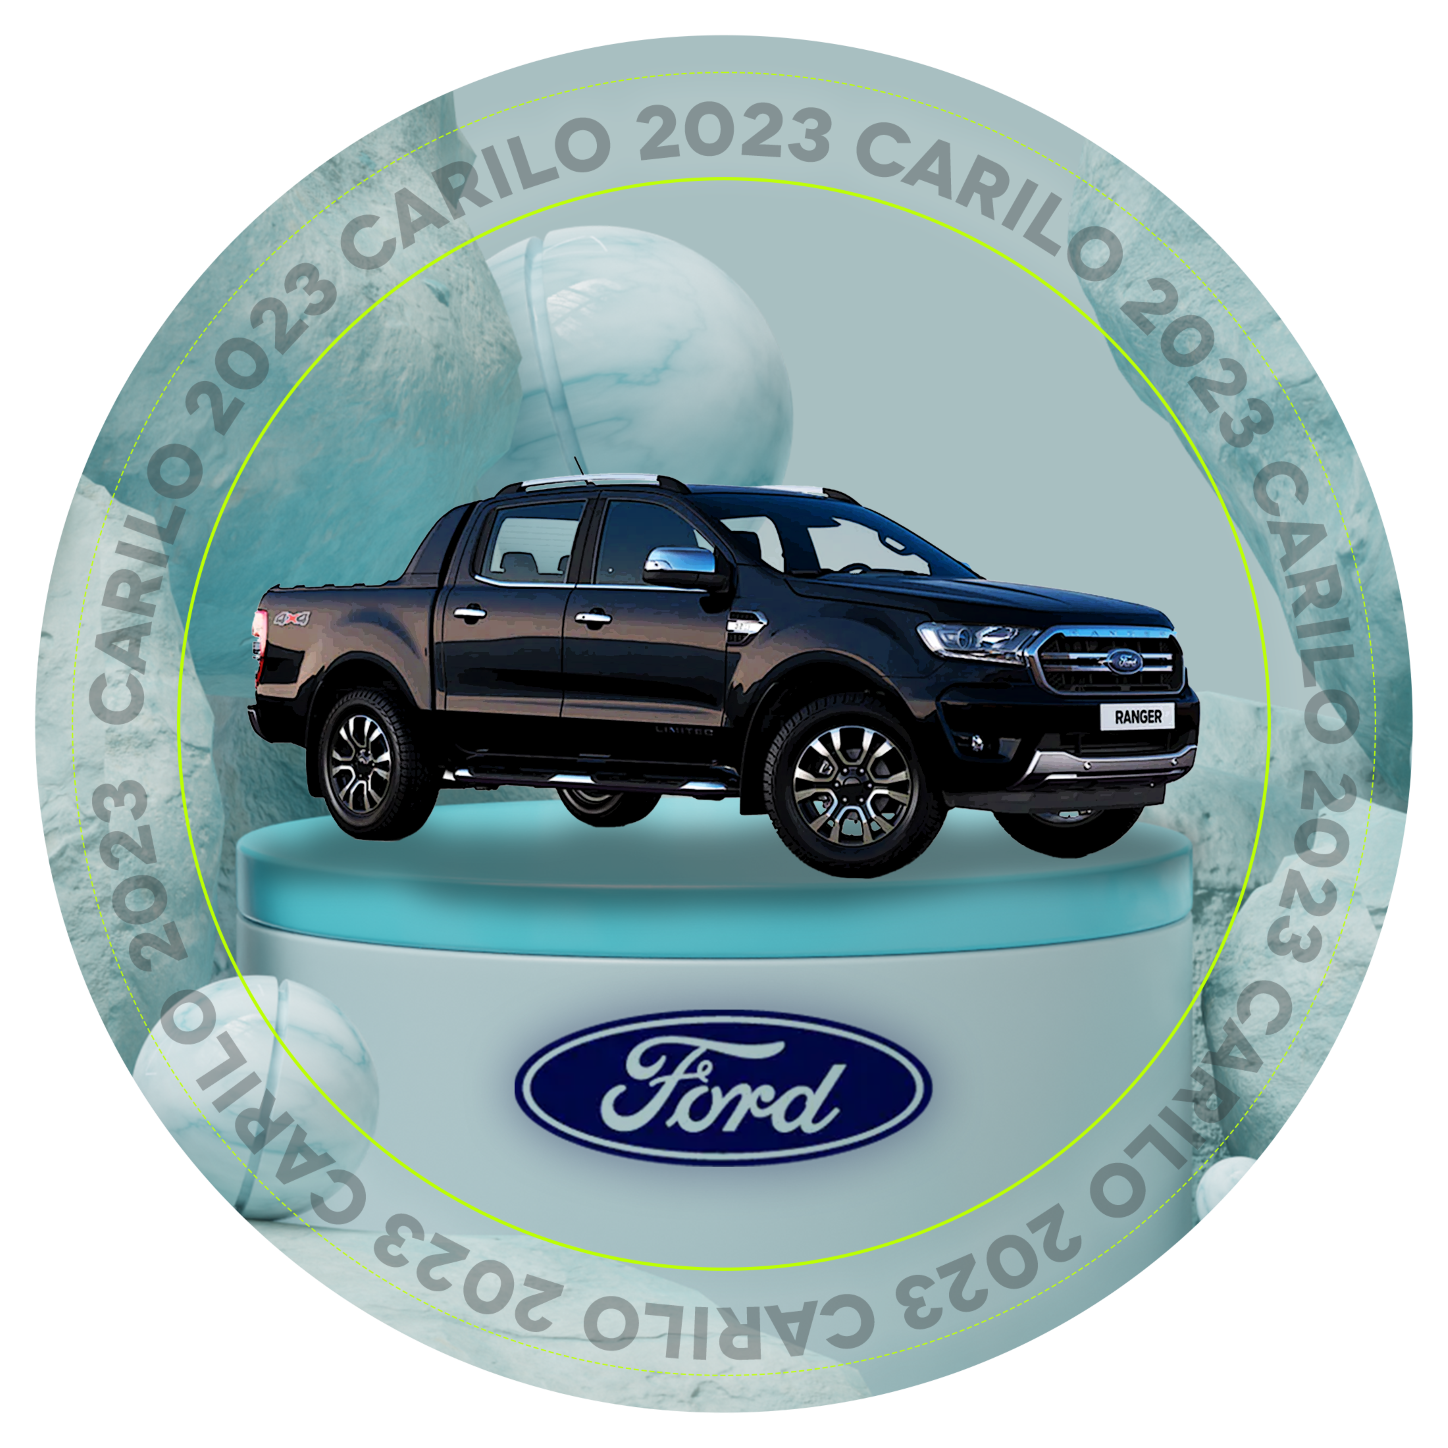 Qurable Ford Ranger Carilo 2023